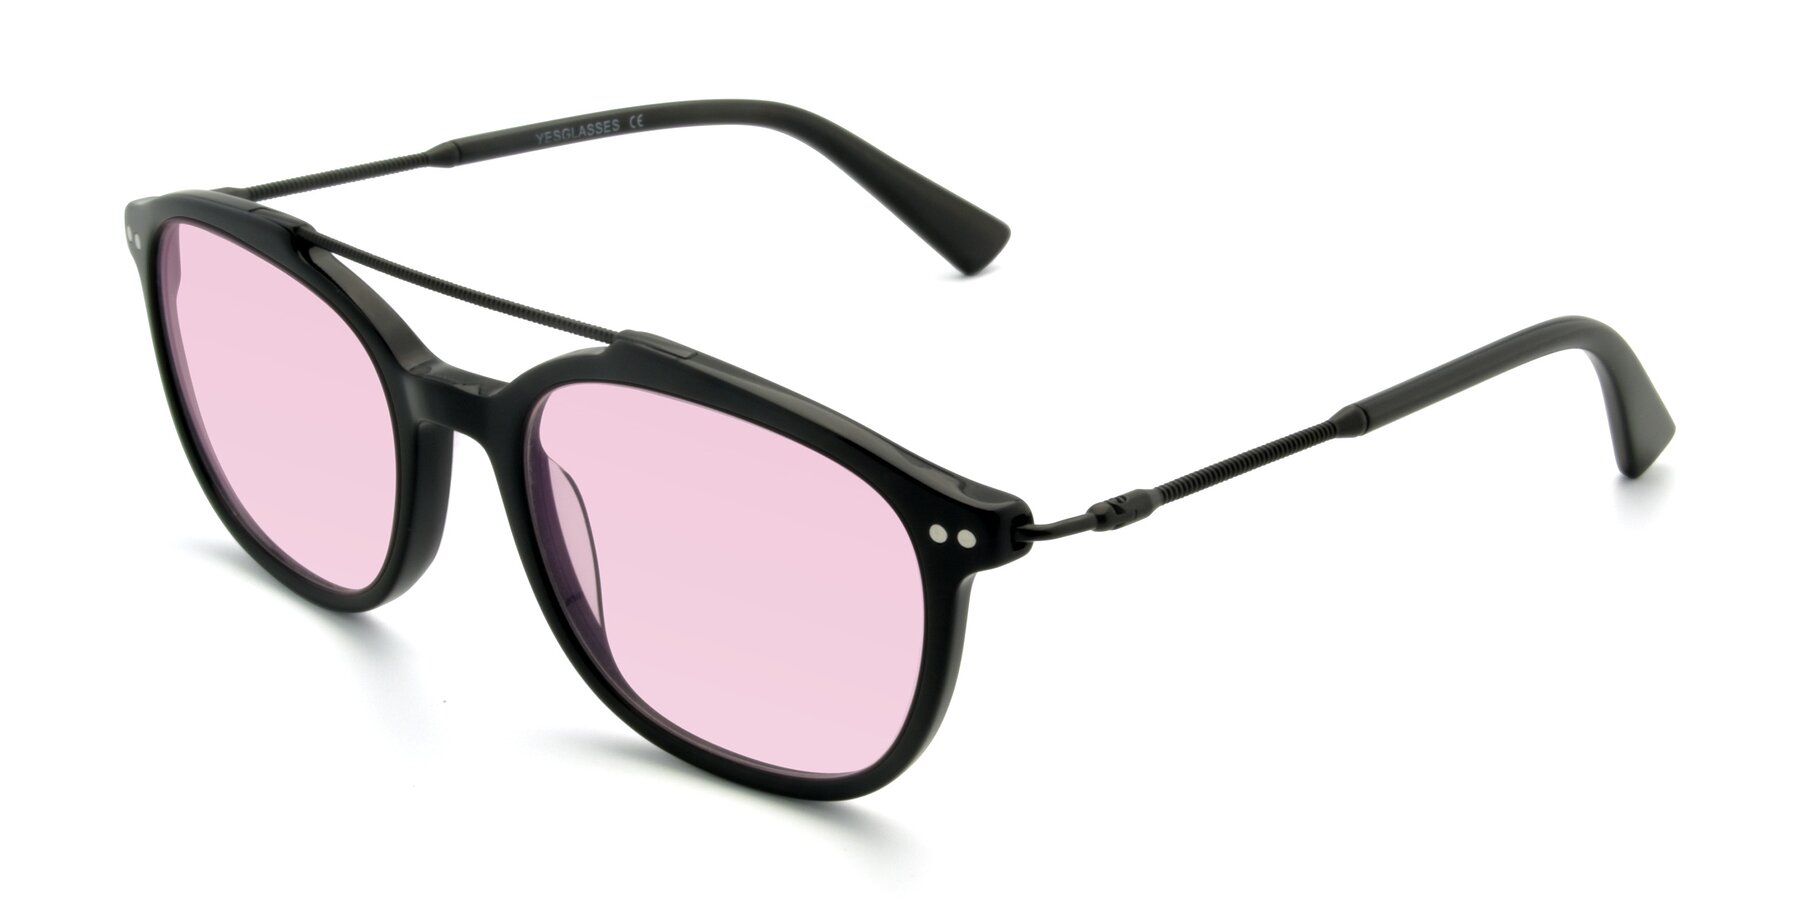 Angle of 17150 in Black with Light Pink Tinted Lenses